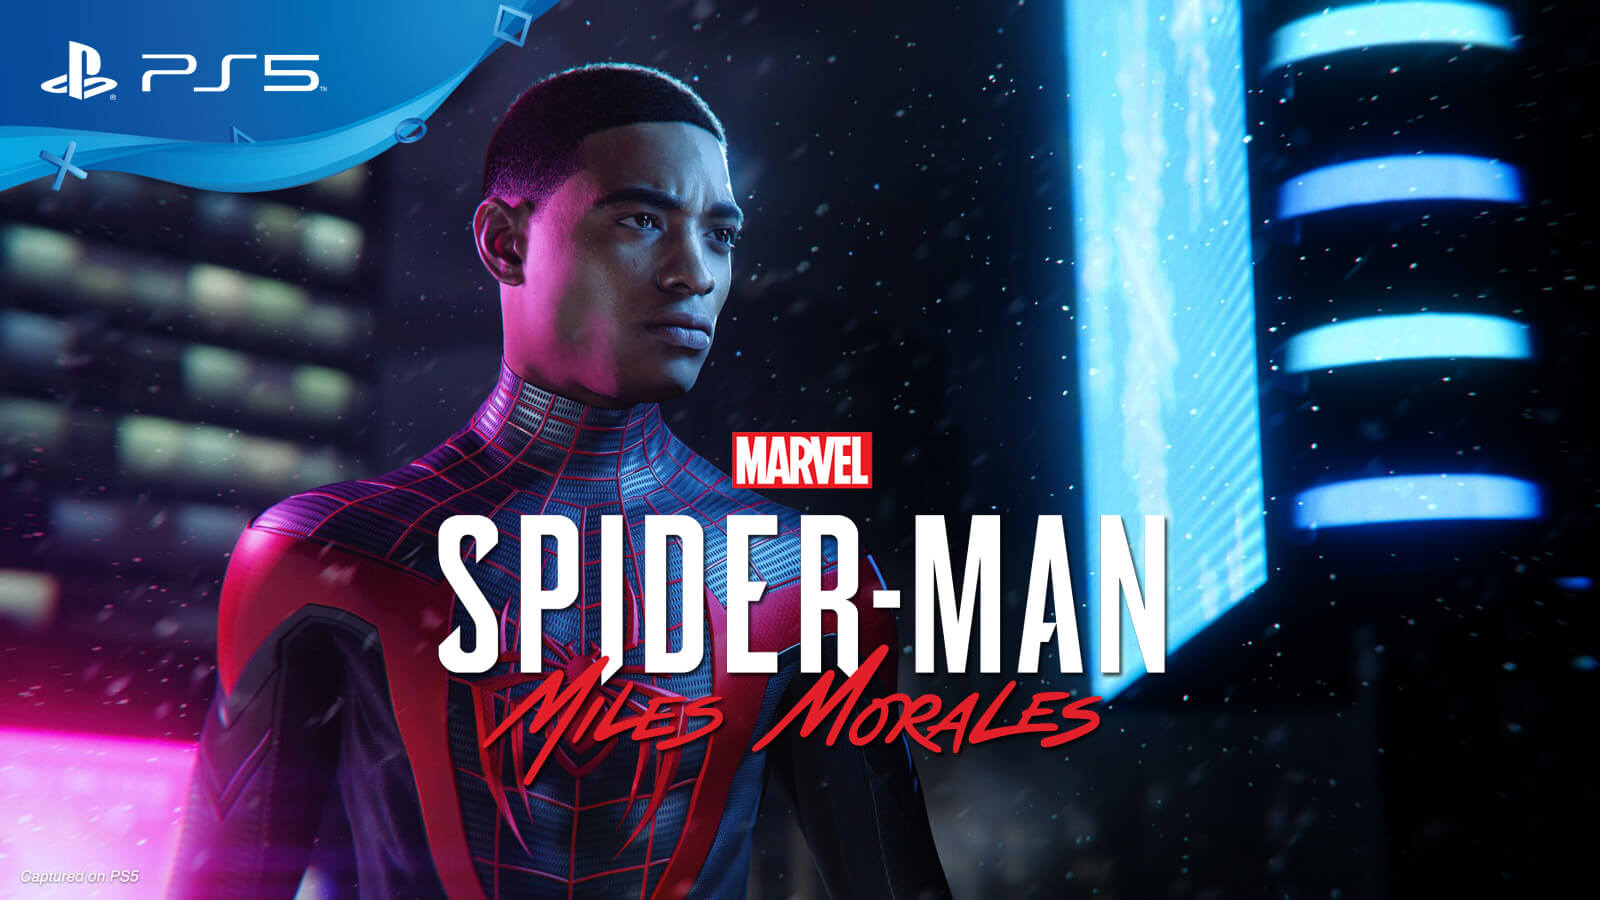 Marvel's Spider-Man: Miles Morales to Release in Holiday 2020